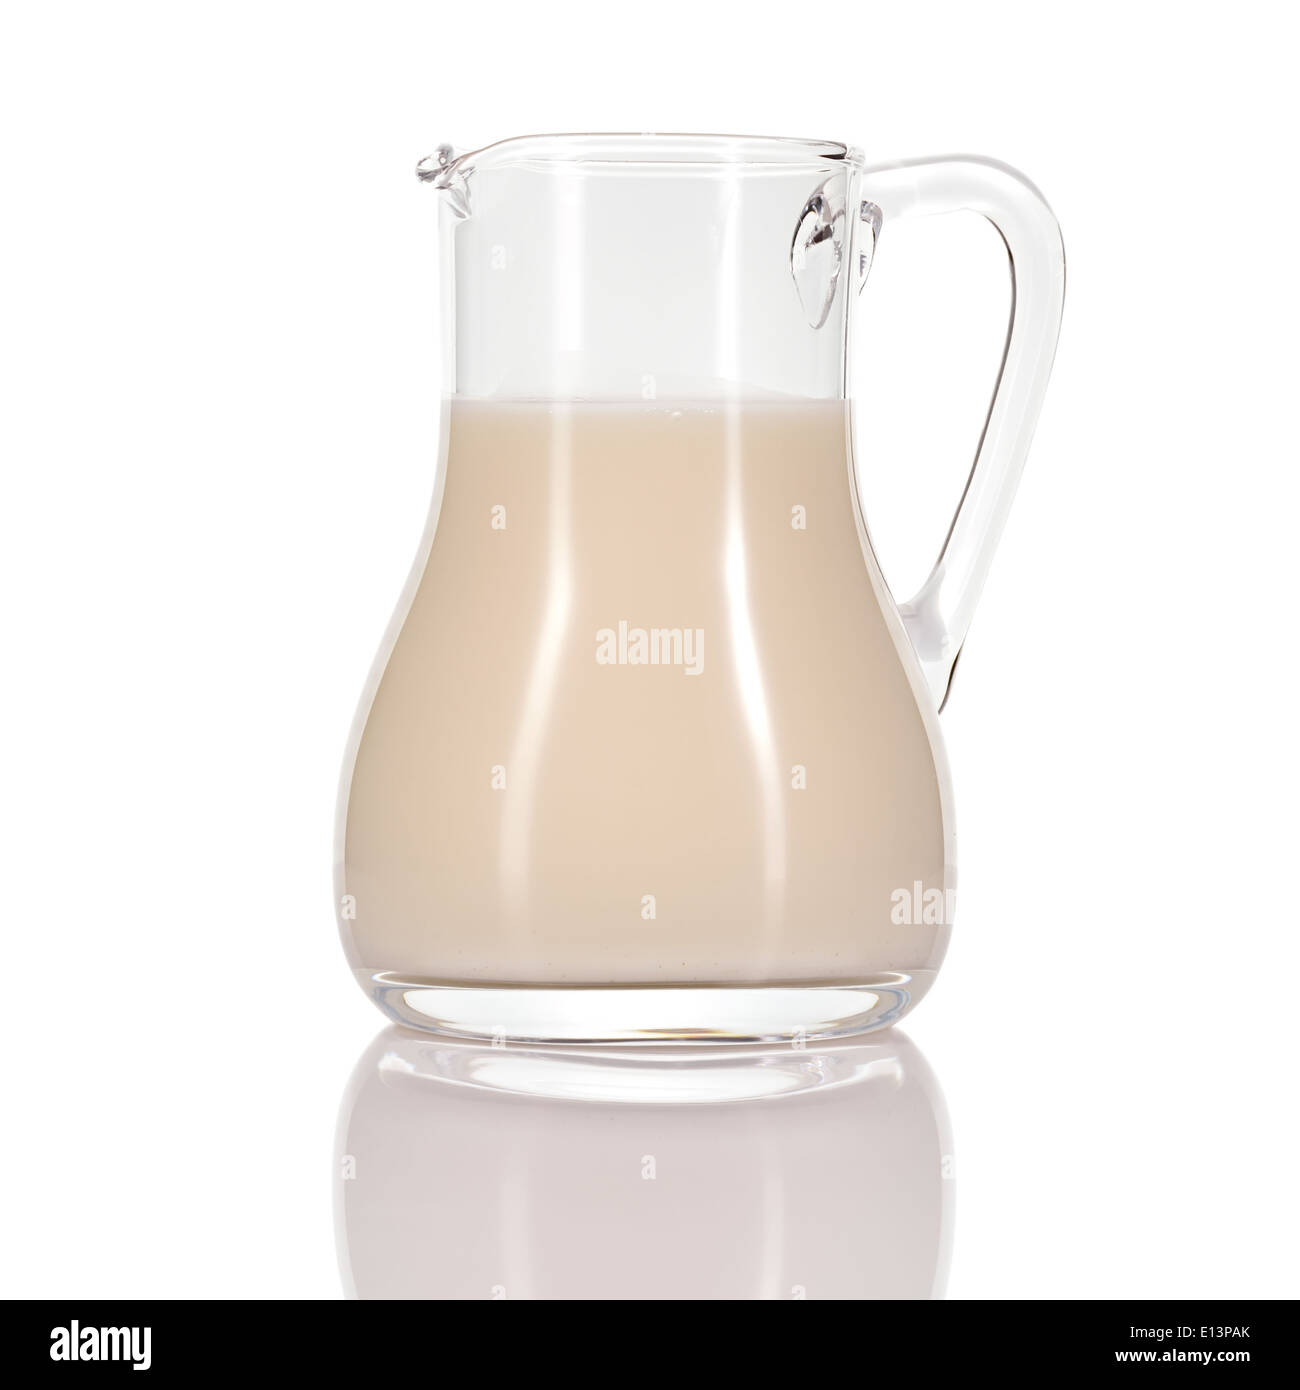 Almond milk as a substitute for dairy milk. Jug of almond milk isolated on white background. Stock Photo